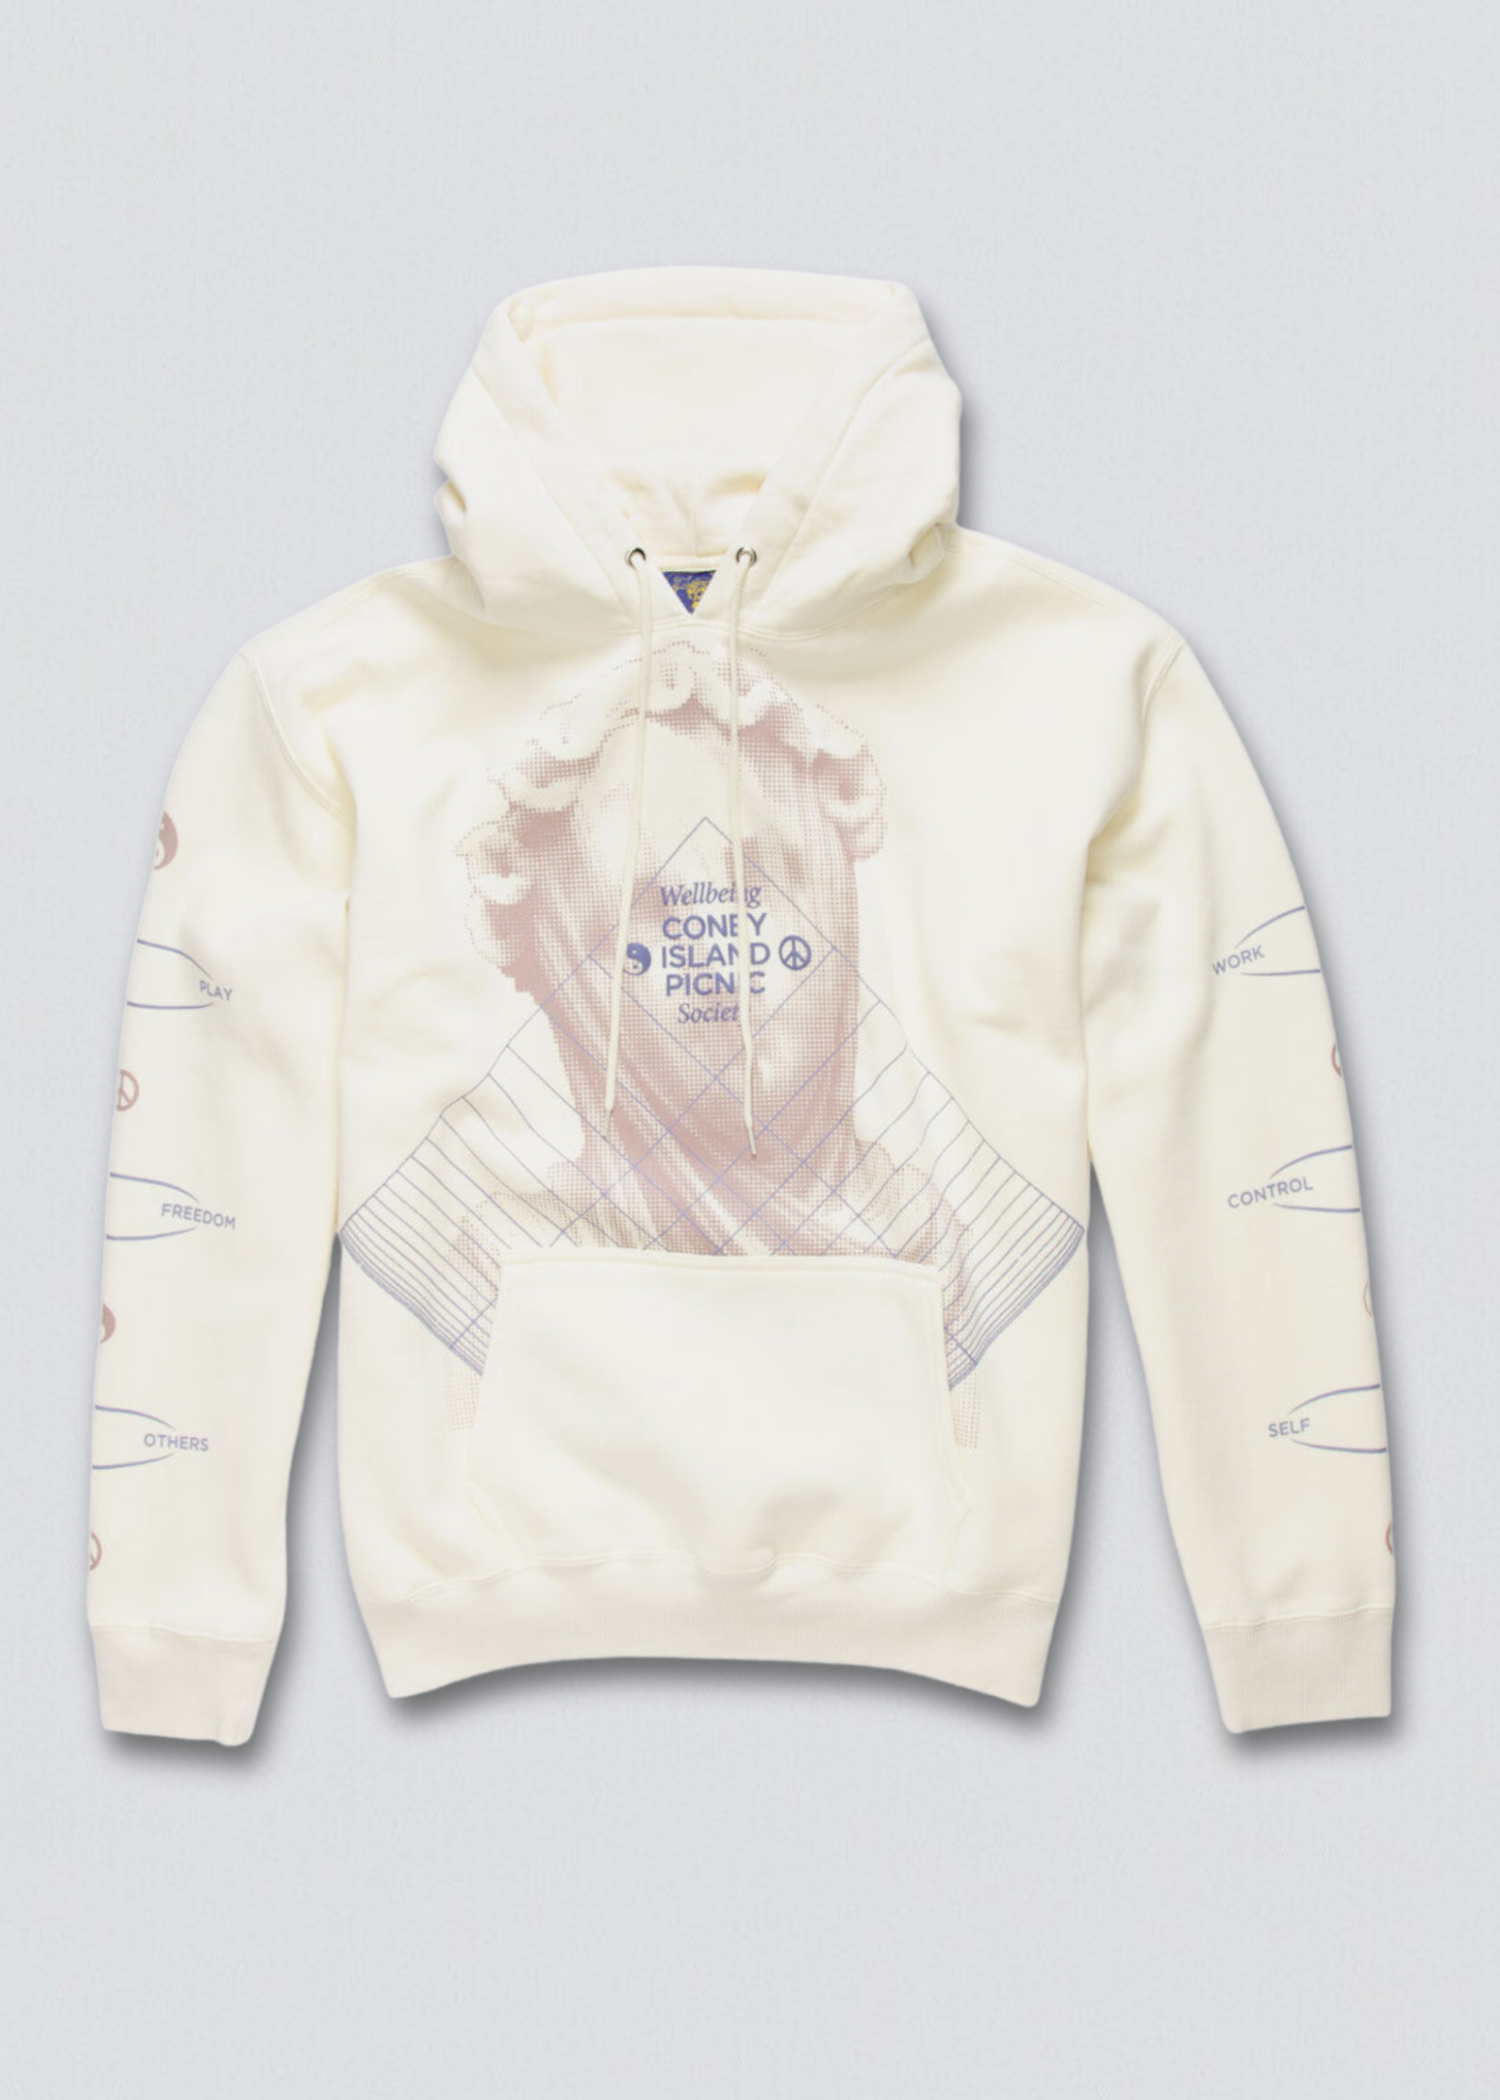 Well Being Society Graphic Pullover Hoodie